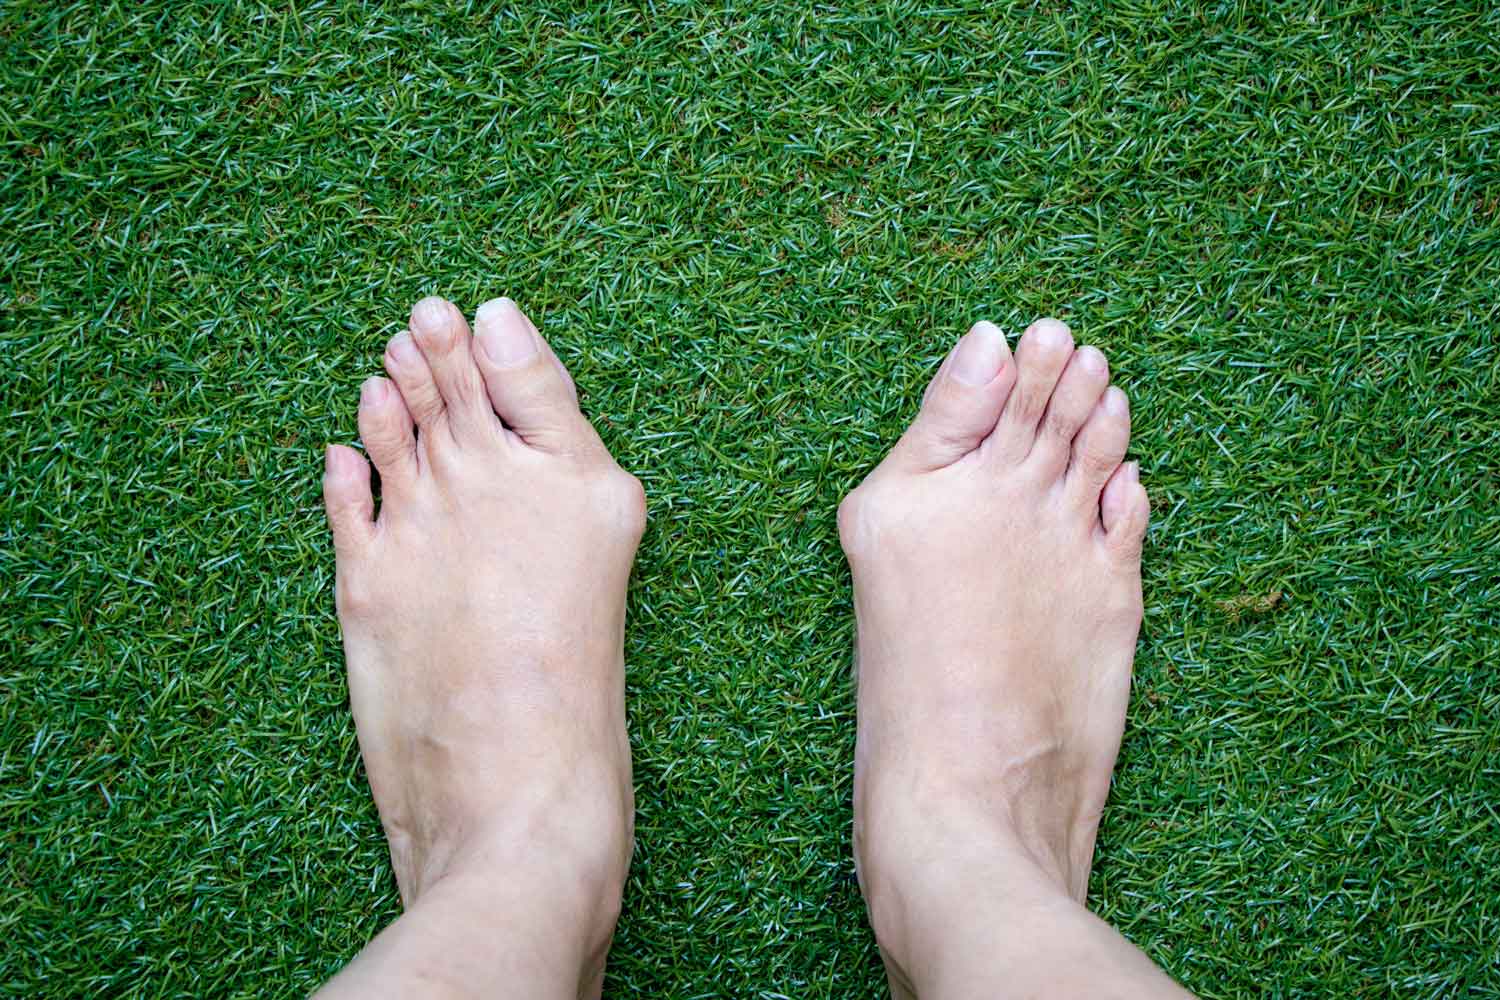 https://www.slcpodiatrist.com/wp-content/uploads/2020/07/7-exercises-that-are-great-for-relieving-bunion-pain.jpg